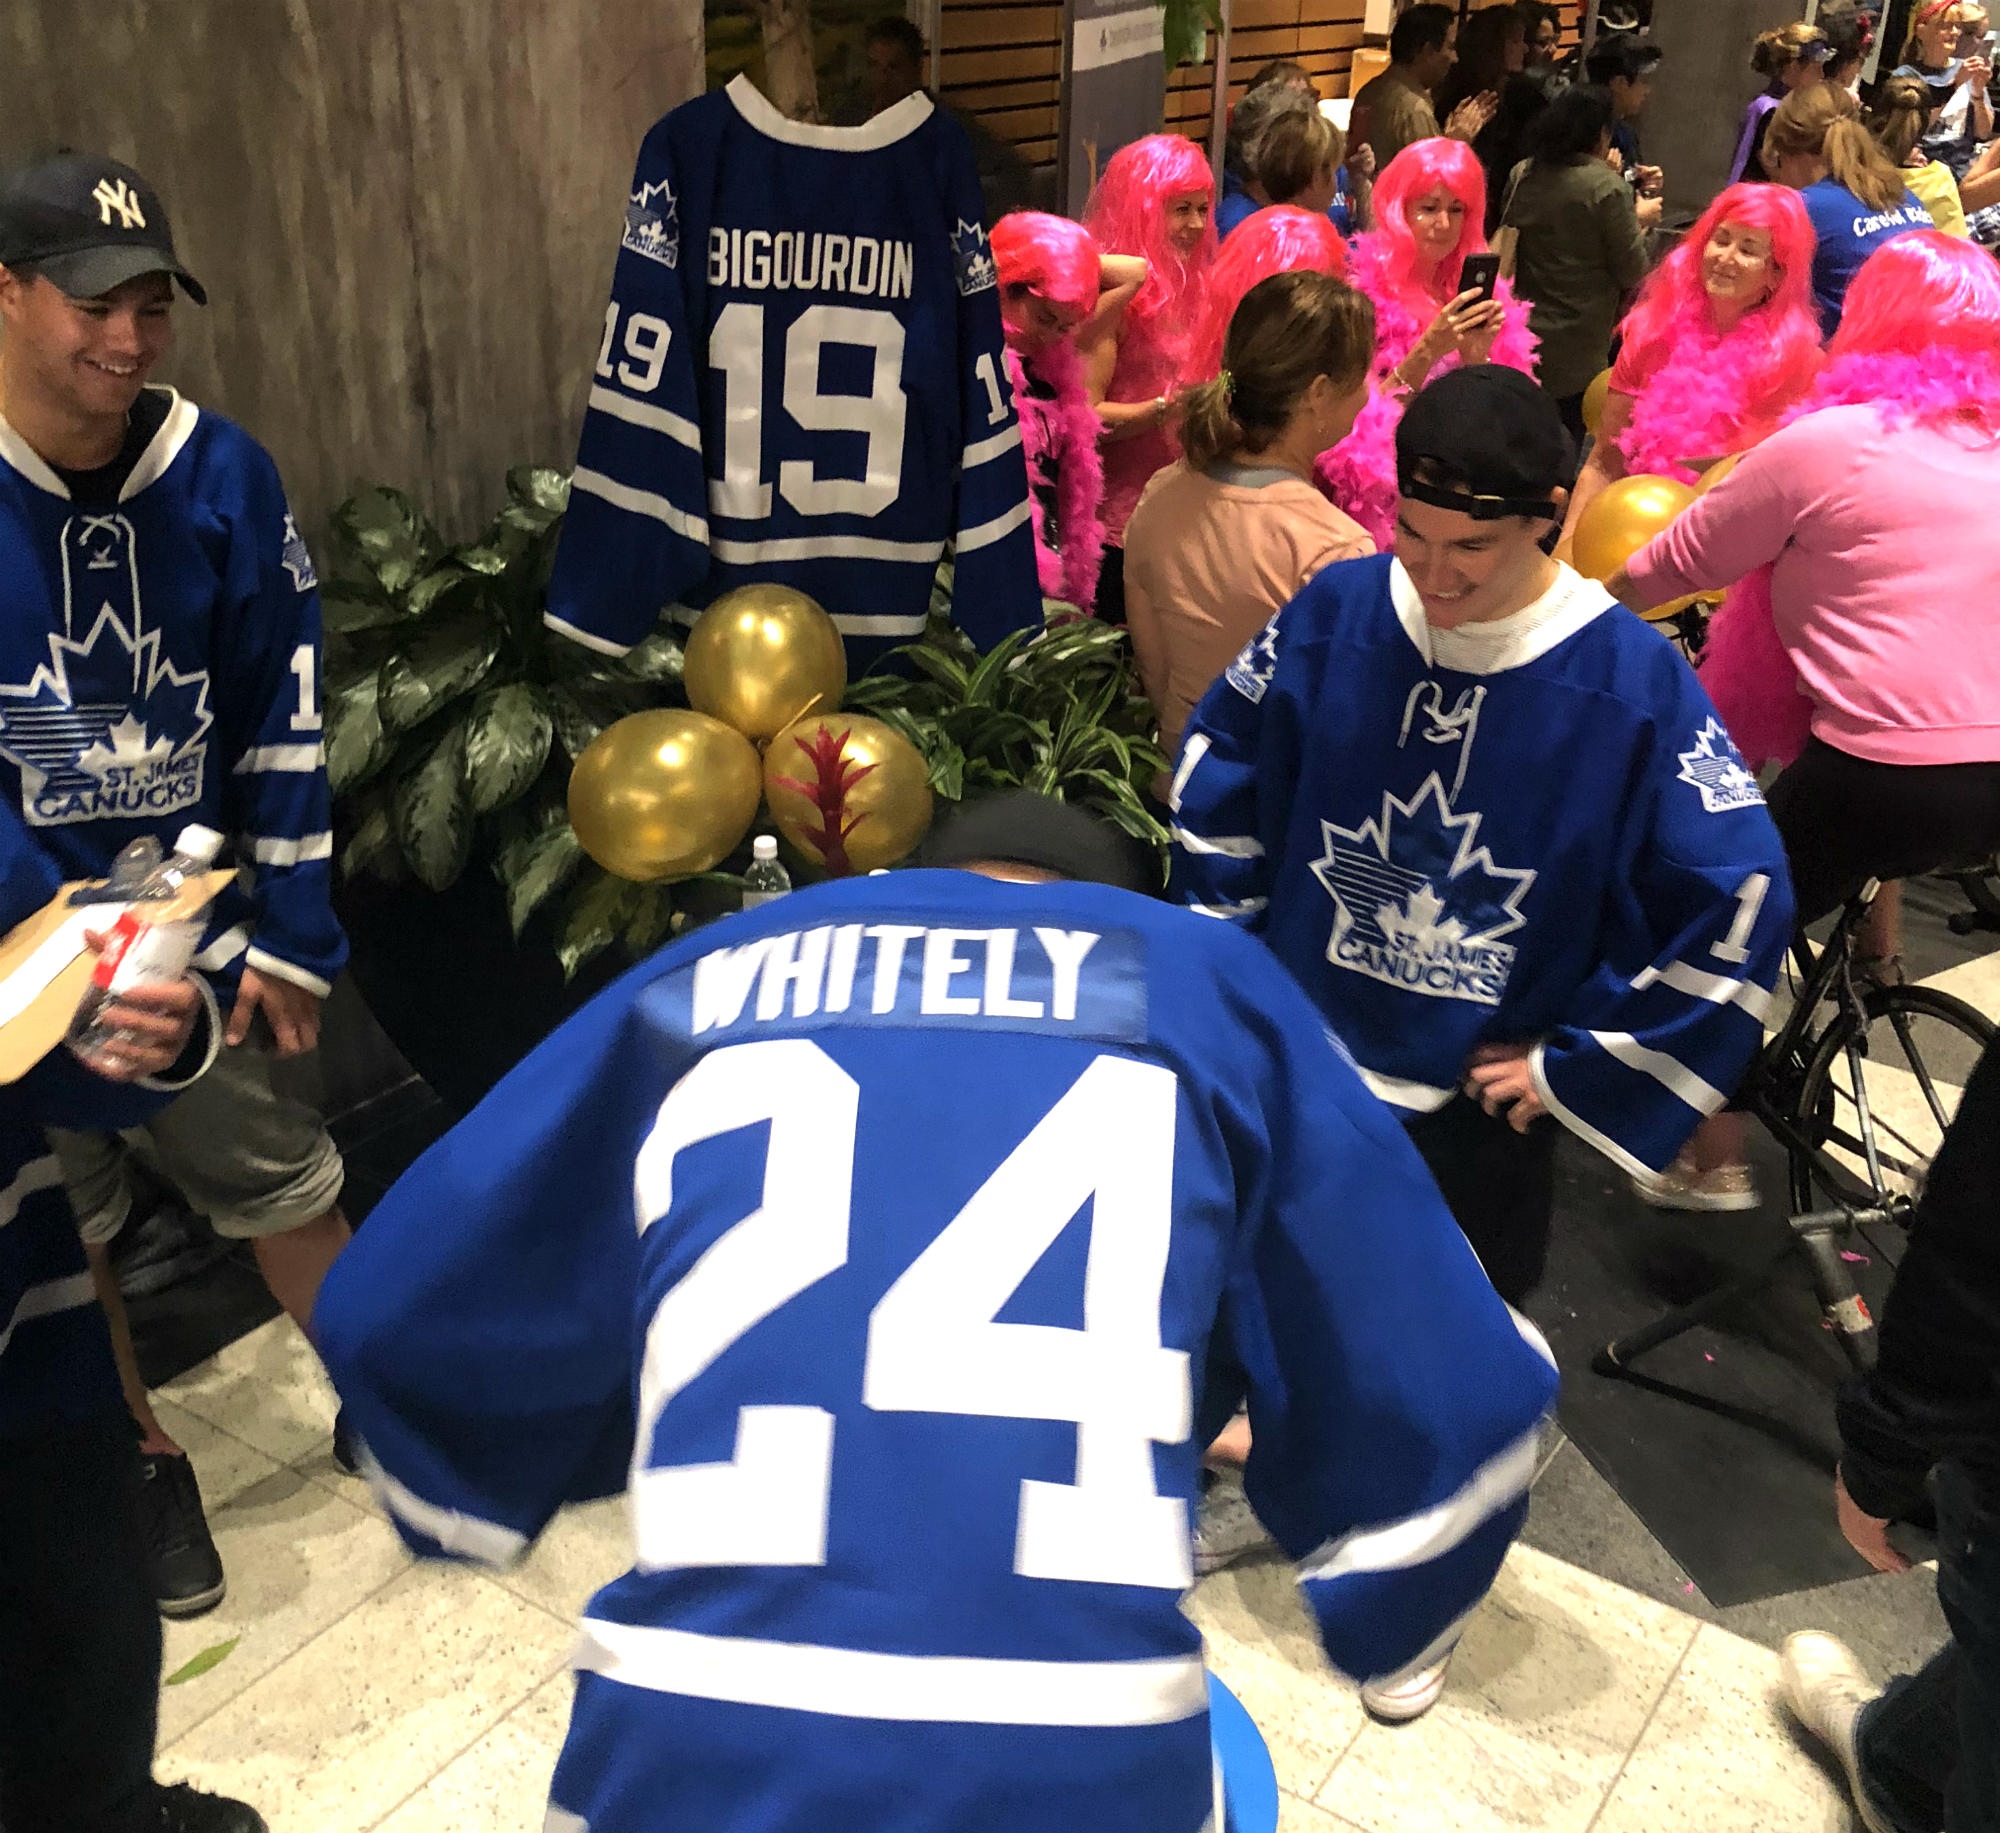 Winnipeg Jets on X: Register to Wheel with the Wheelers for the Ride  Inside on Nov. 5th! Funds raised go to @CancerCareMBFdn to support young  people in Manitoba with the hardest to